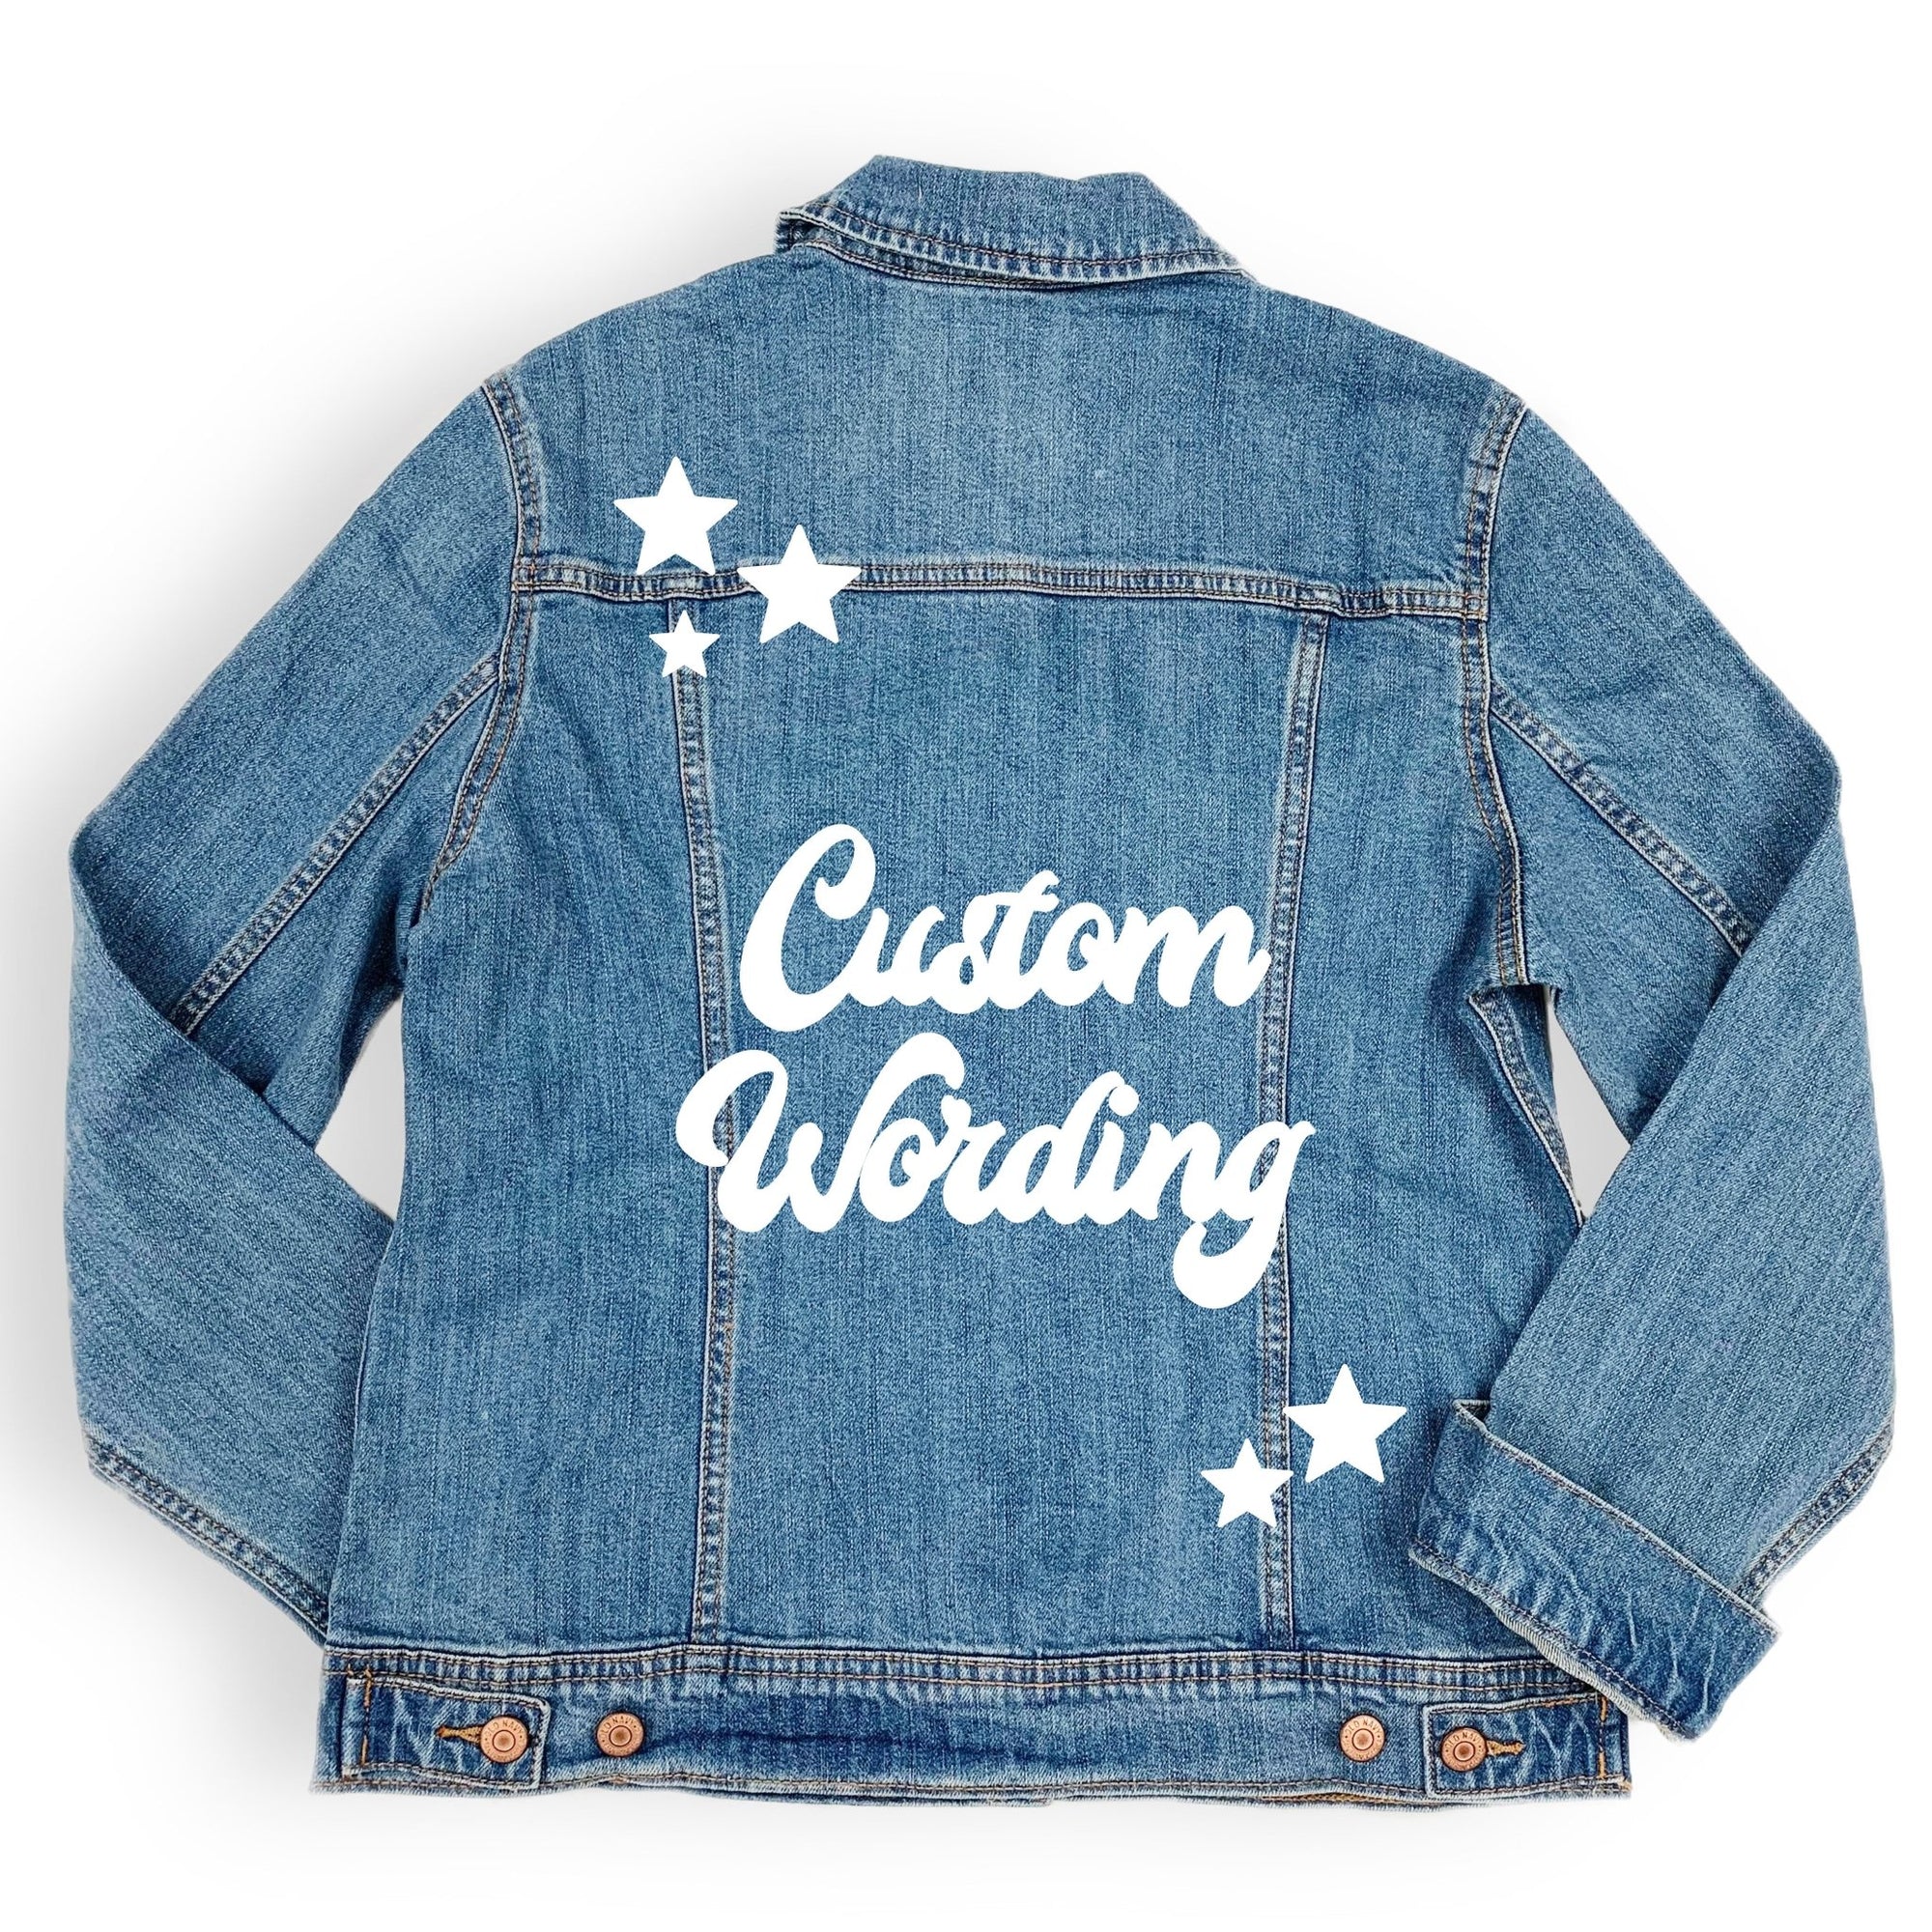 A jean jacket lays showing the customized wording and stars on the back.